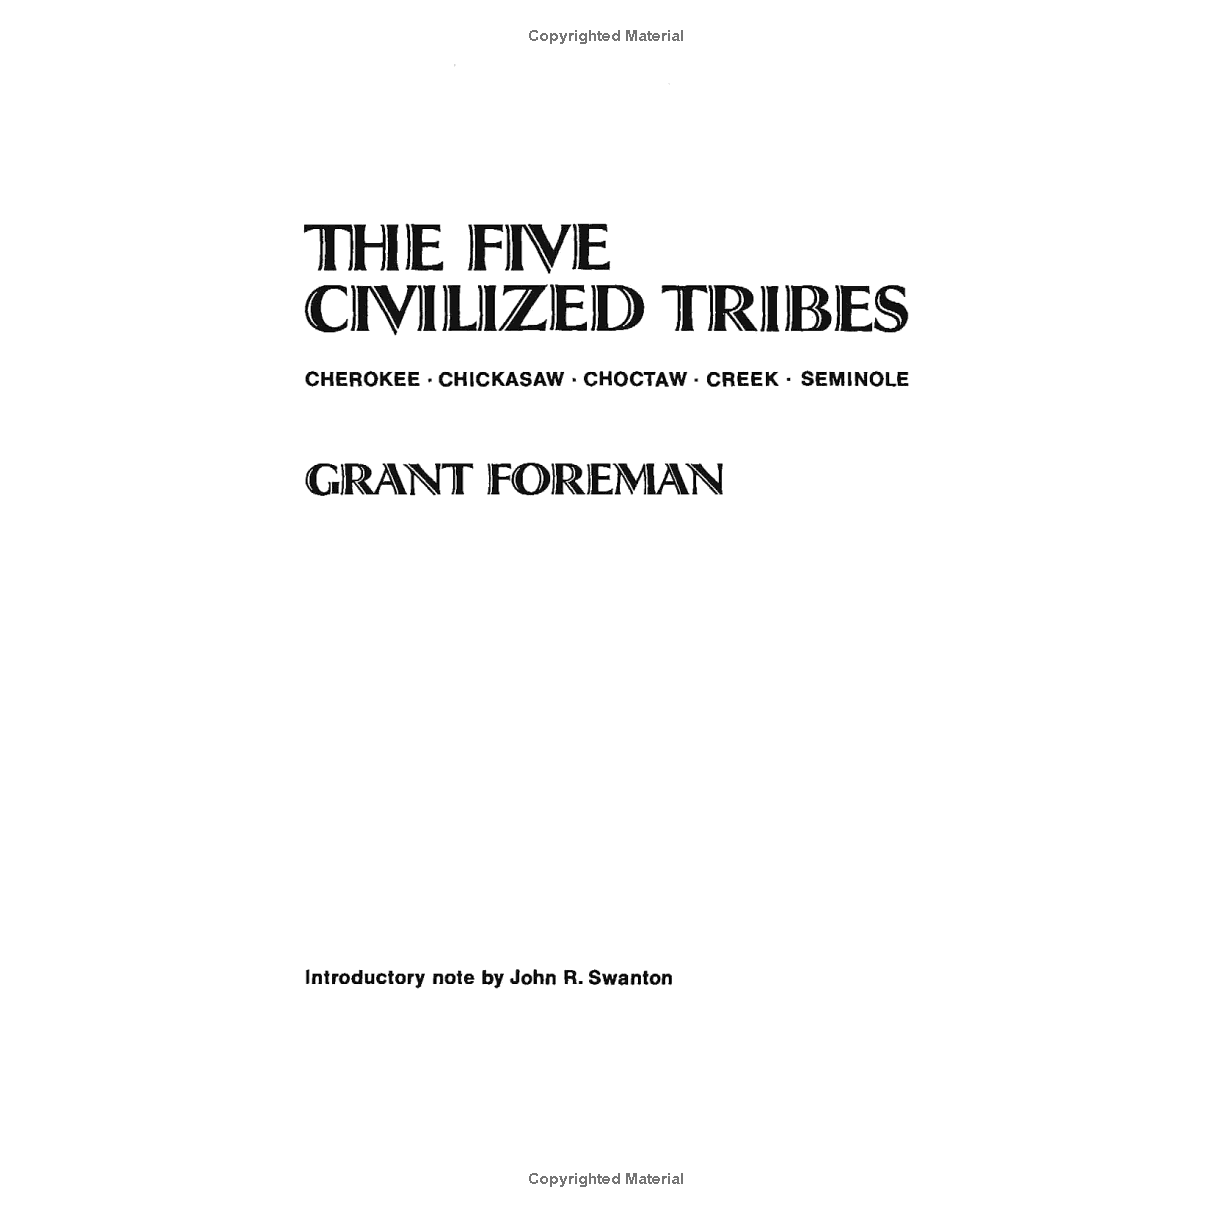 The Five Civilized Tribes by Grant Foreman